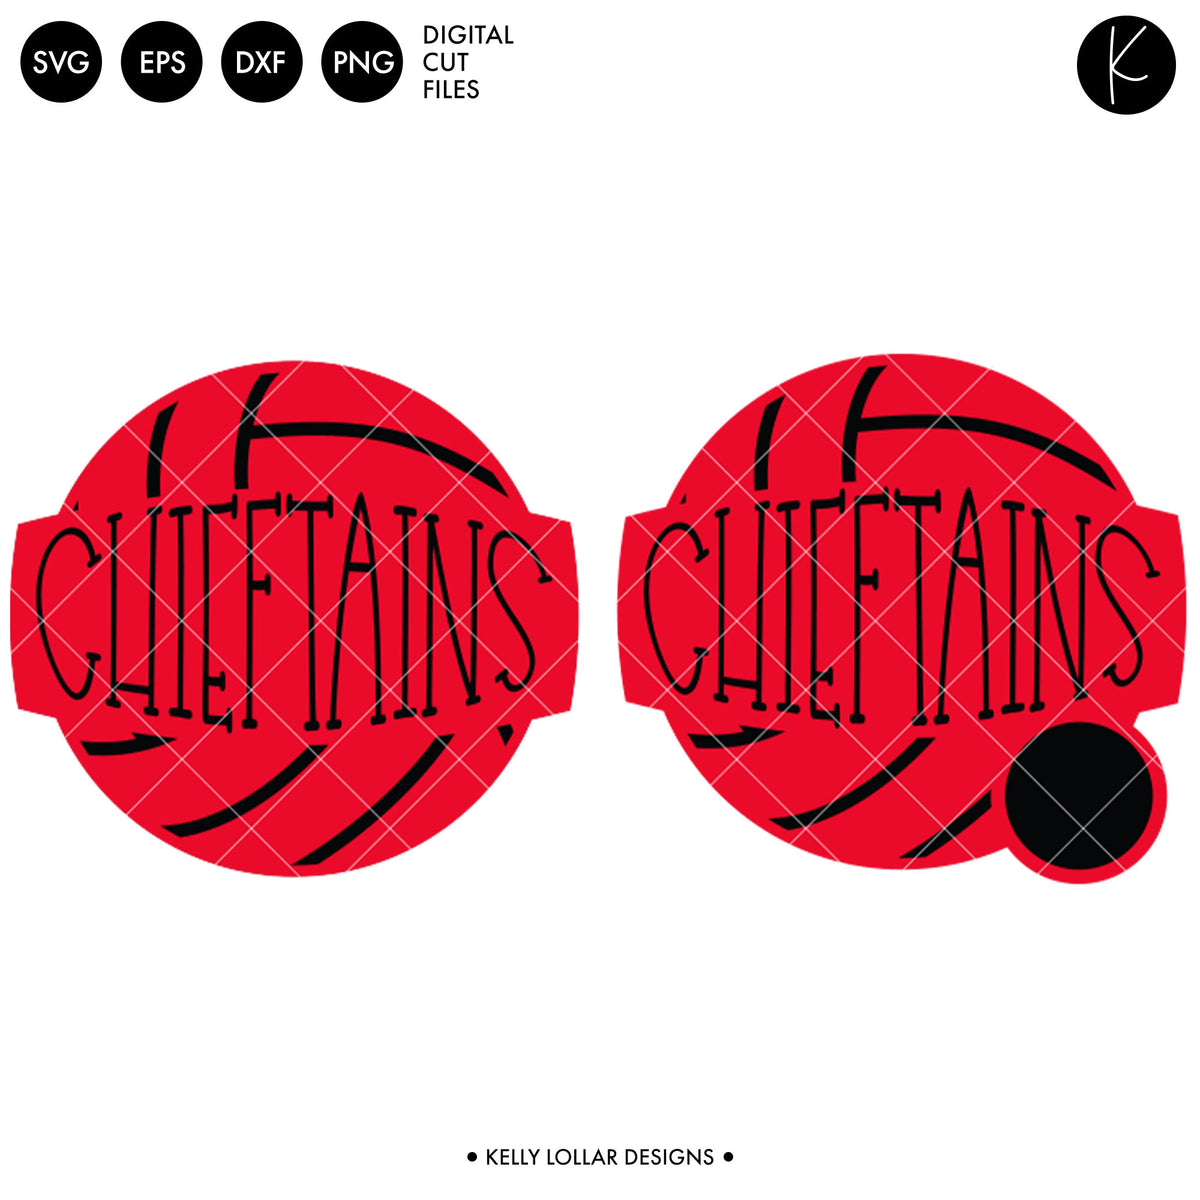 Chieftains Volleyball Bundle | SVG DXF EPS PNG Cut Files